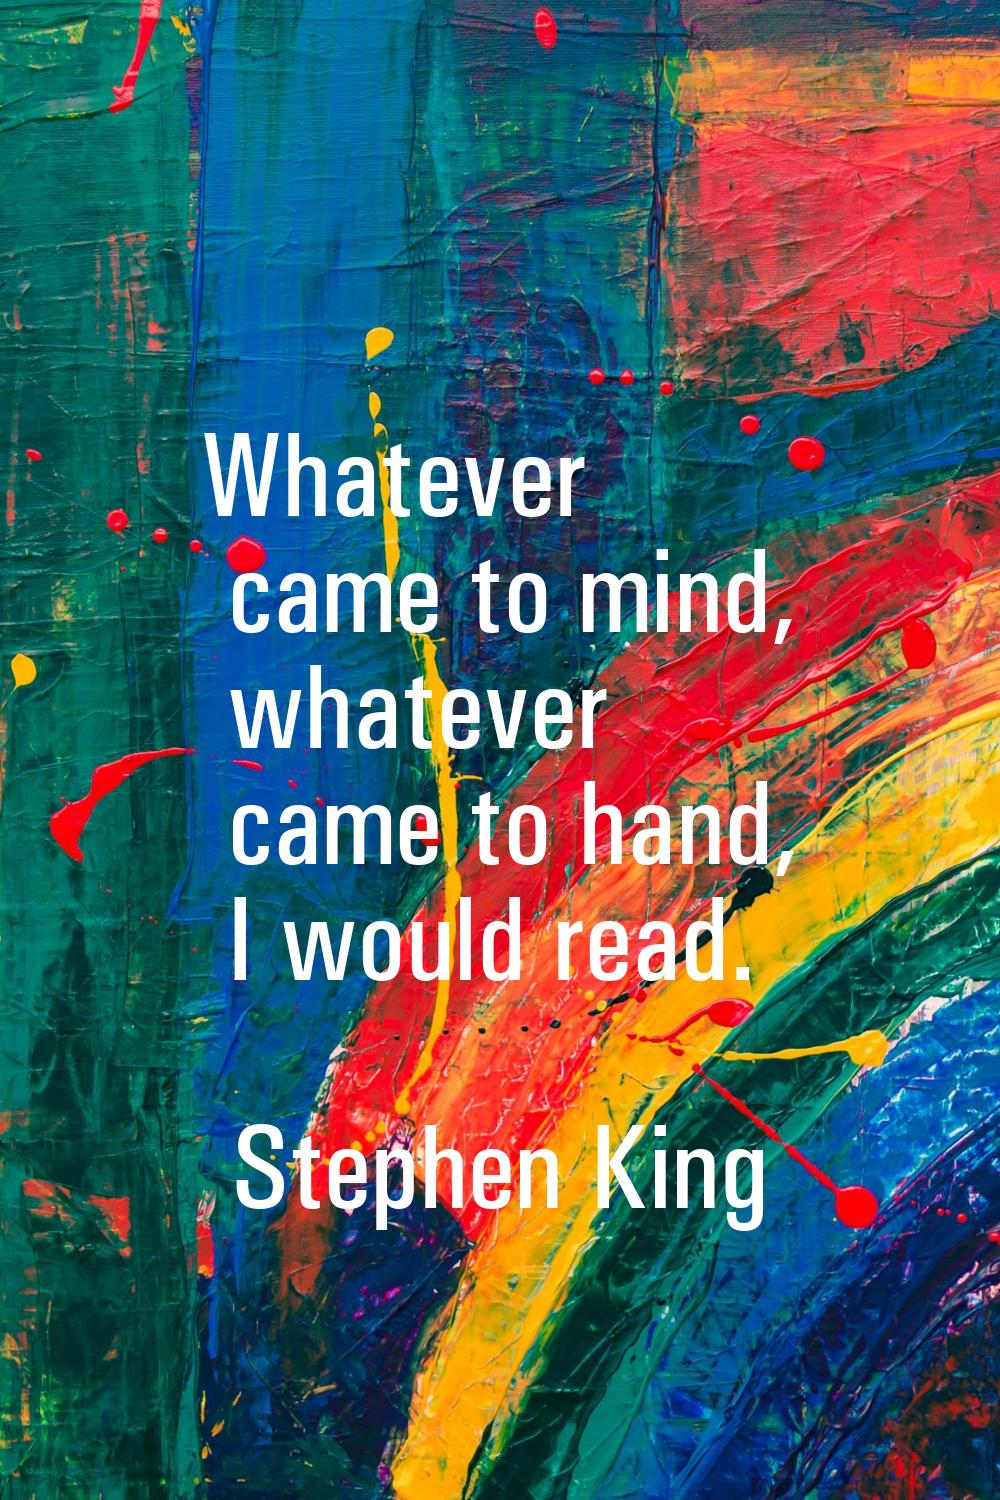 Whatever came to mind, whatever came to hand, I would read.